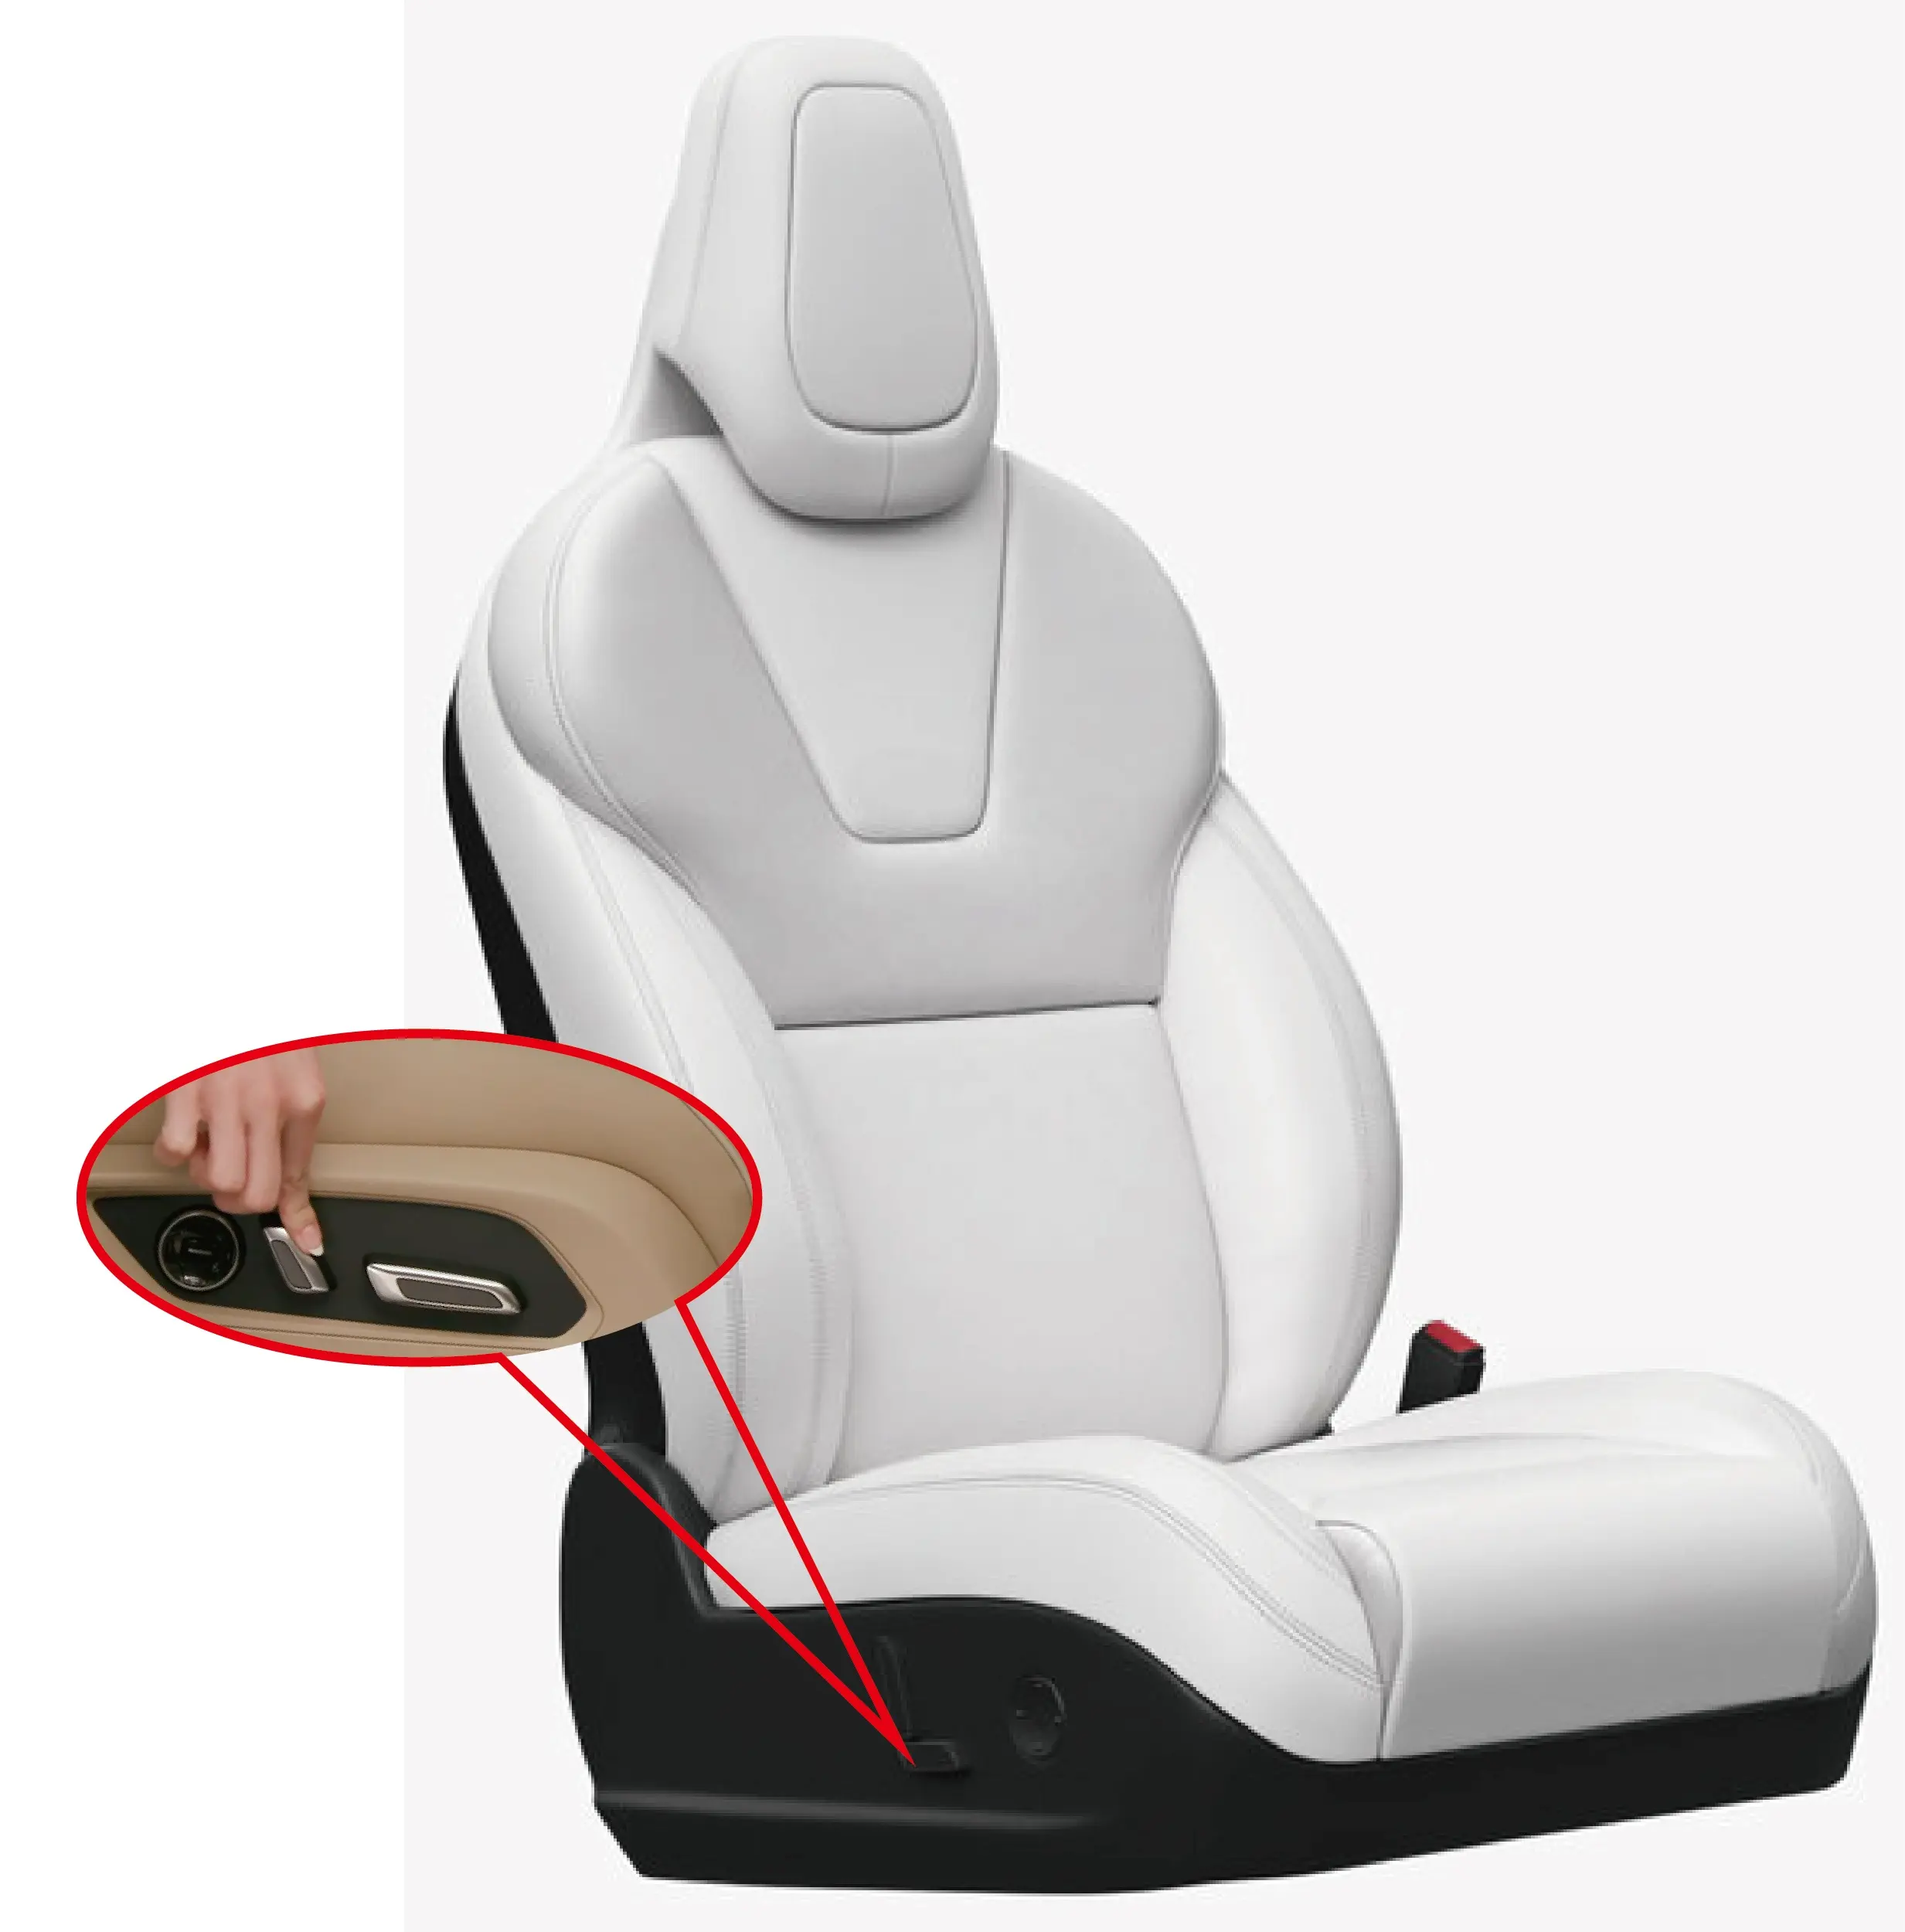 8-Way Embedded type vehicle Seat Switch Comfort device |auto heating/fan control parts seat adjustment car cushion accessories